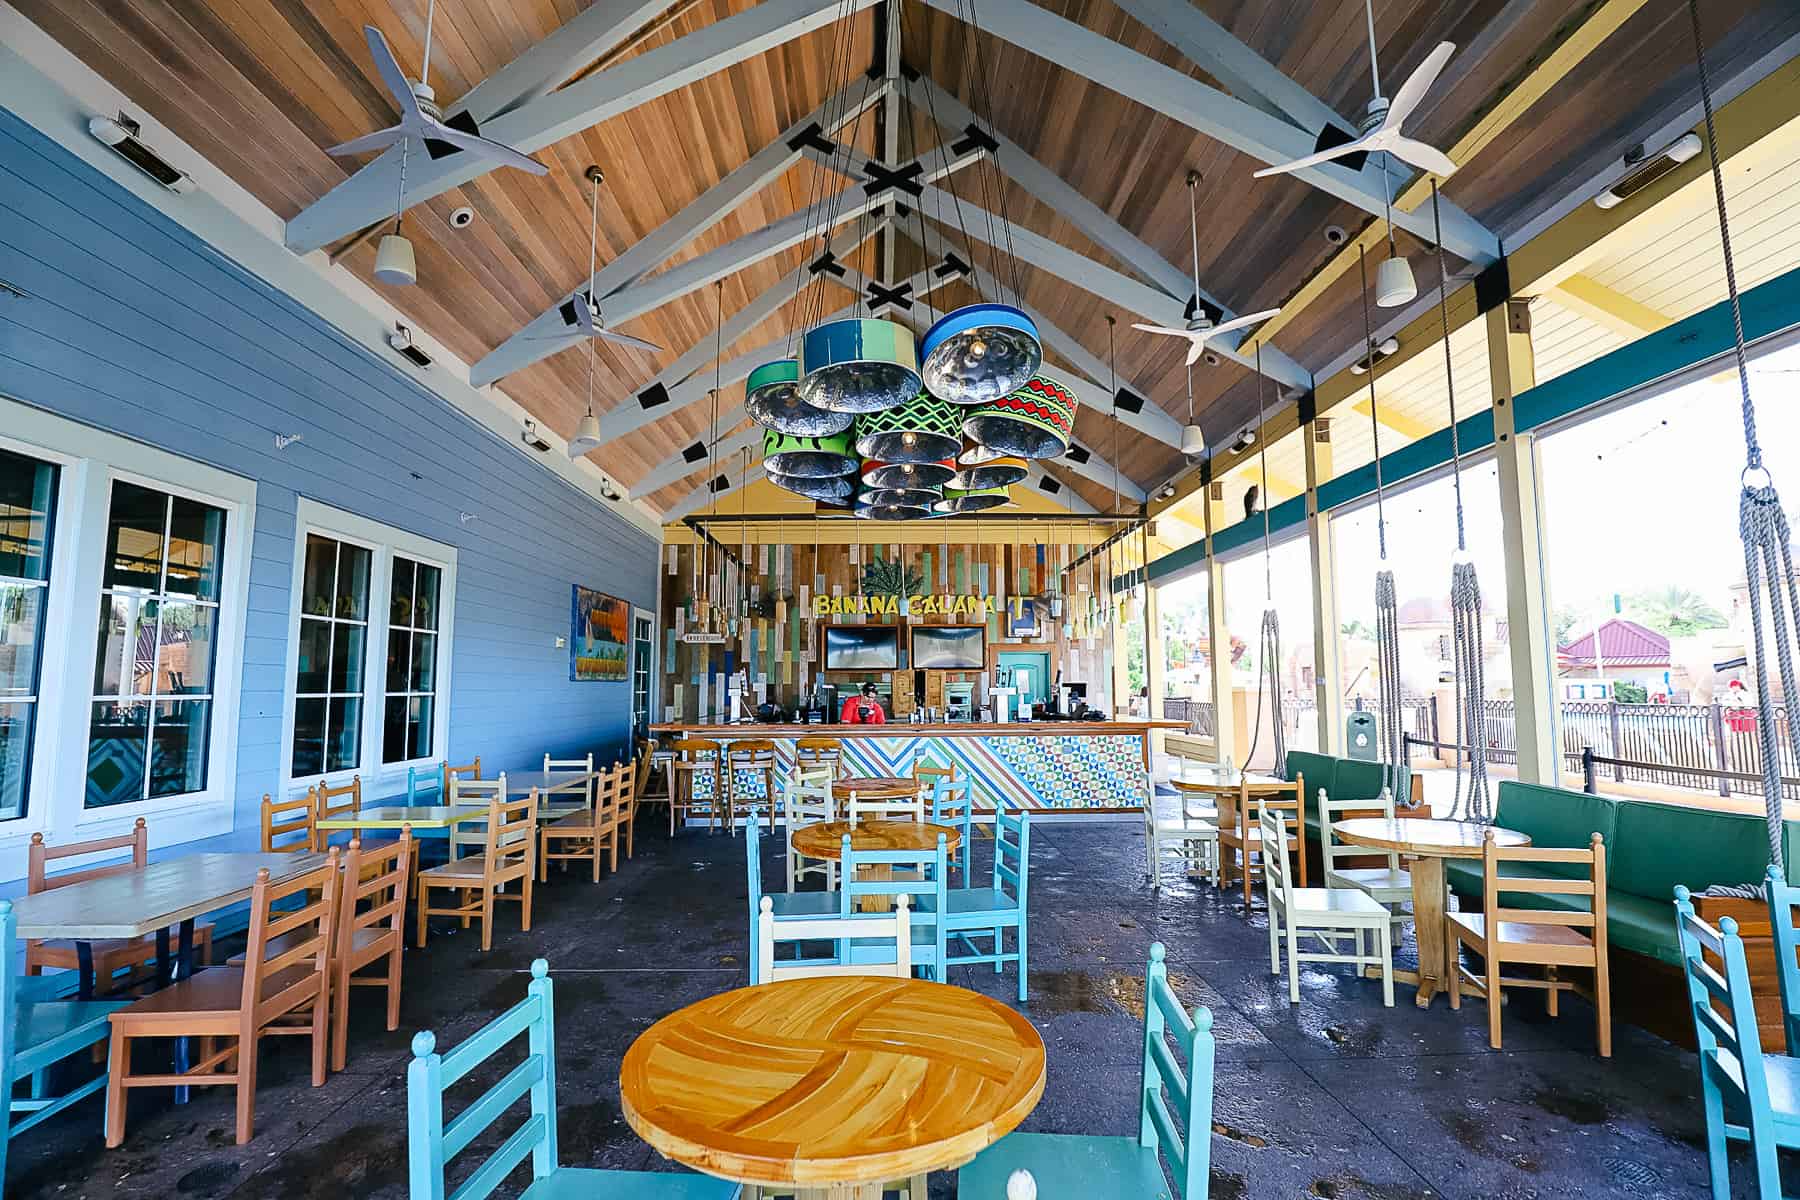 seating area with tables and chairs at Banana Cabana near the pool